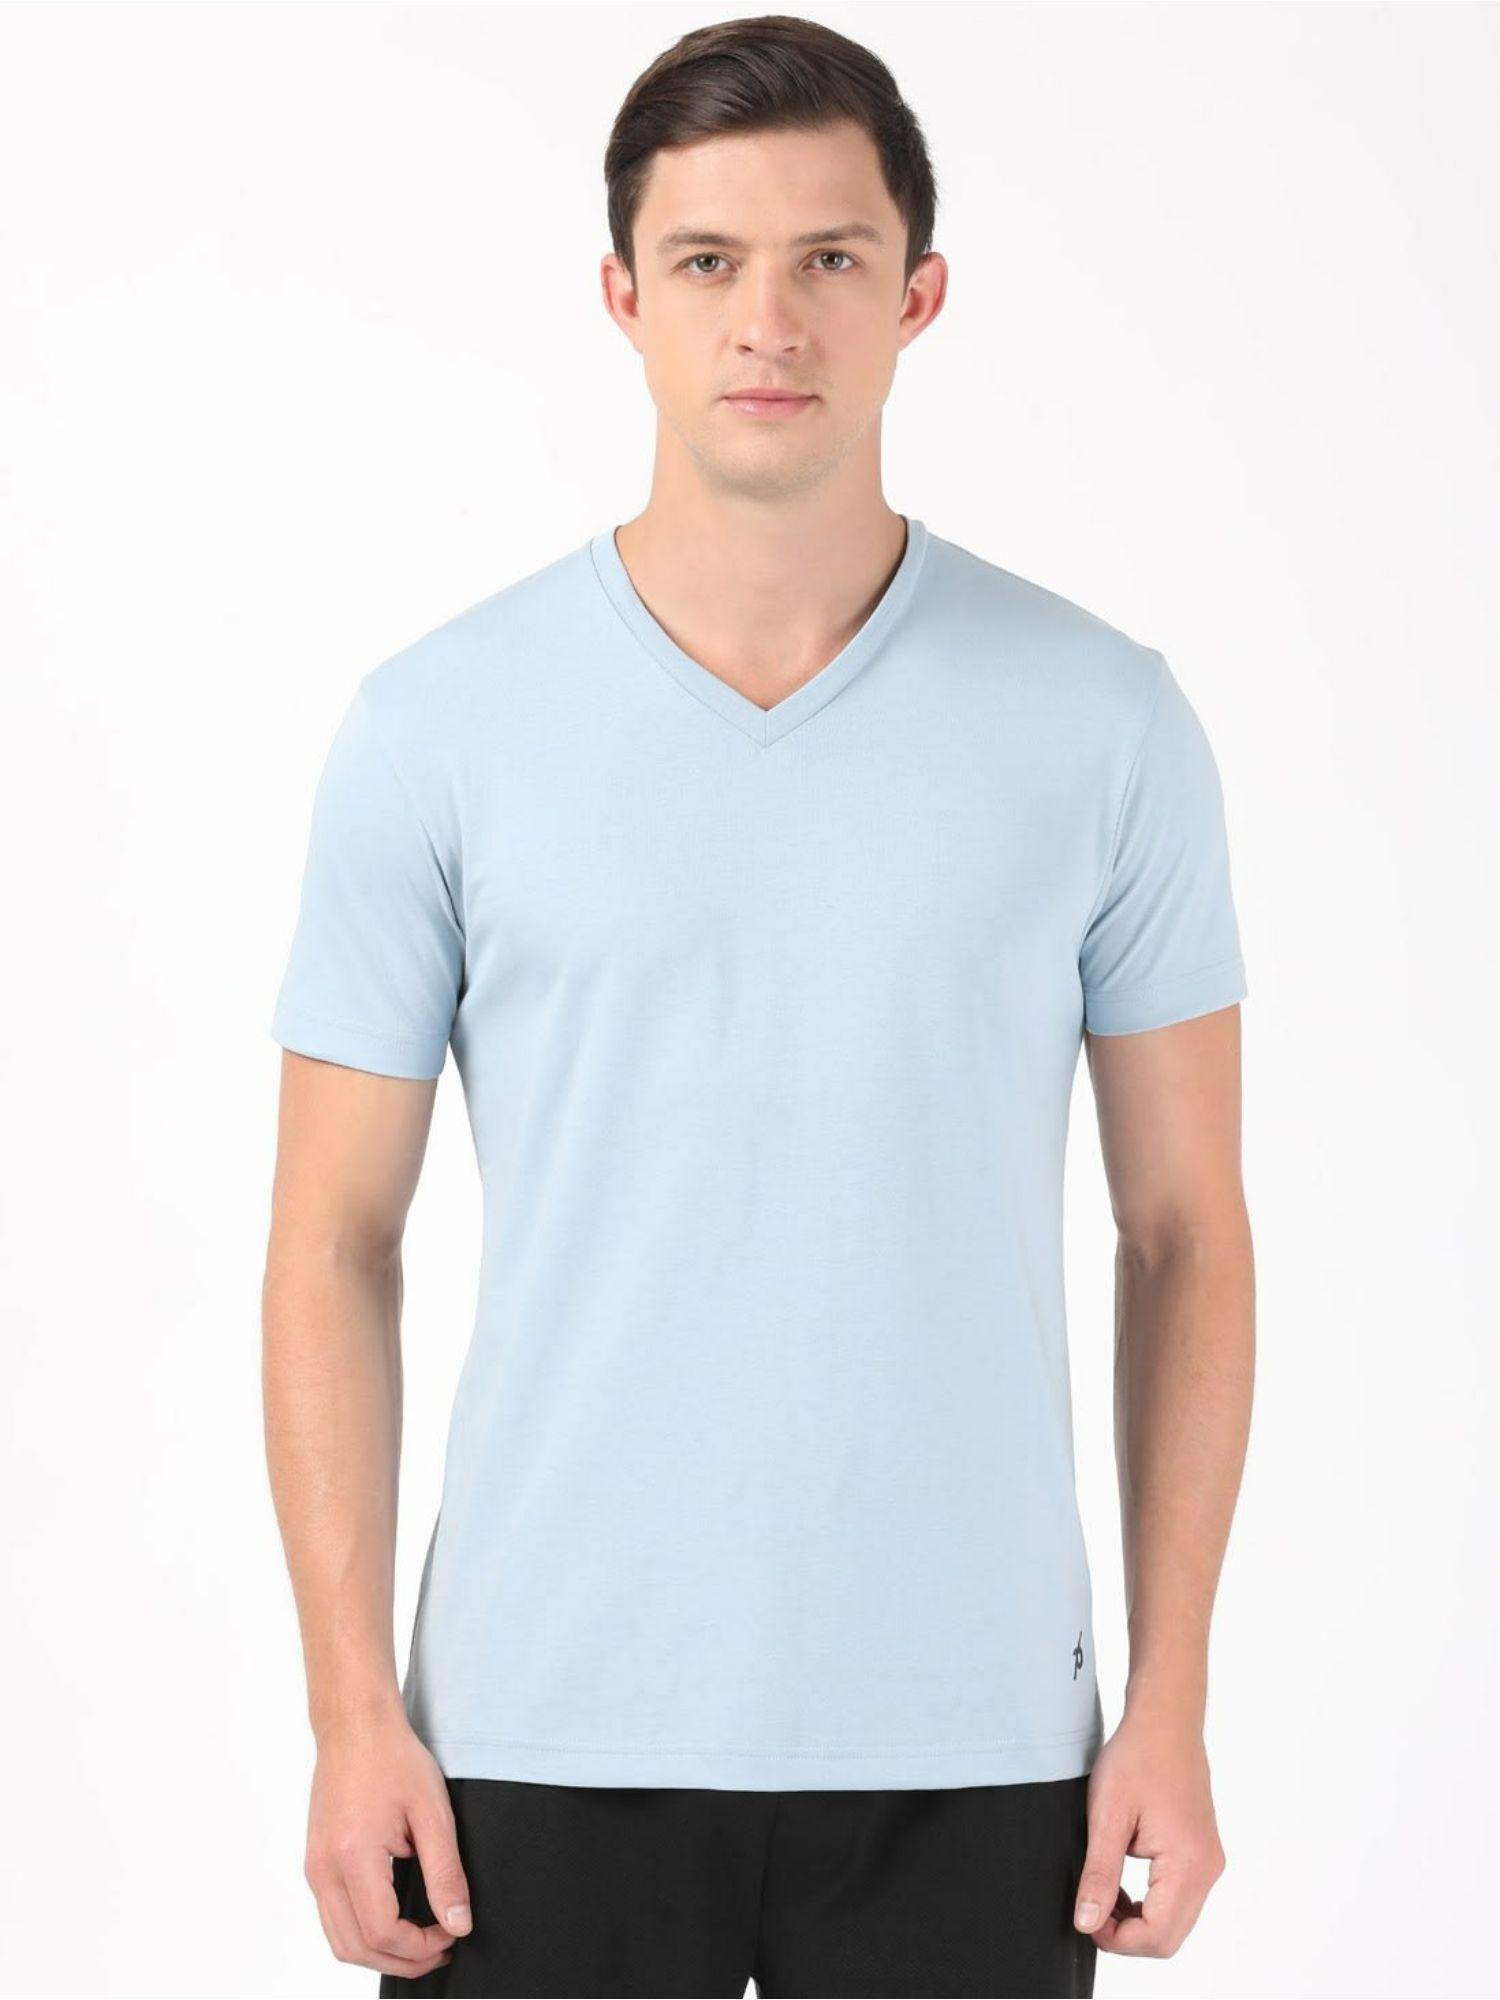 2726-mens-super-combed-cotton-rich-solid-v-neck-half-sleeve-t-shirt-dusty-blue